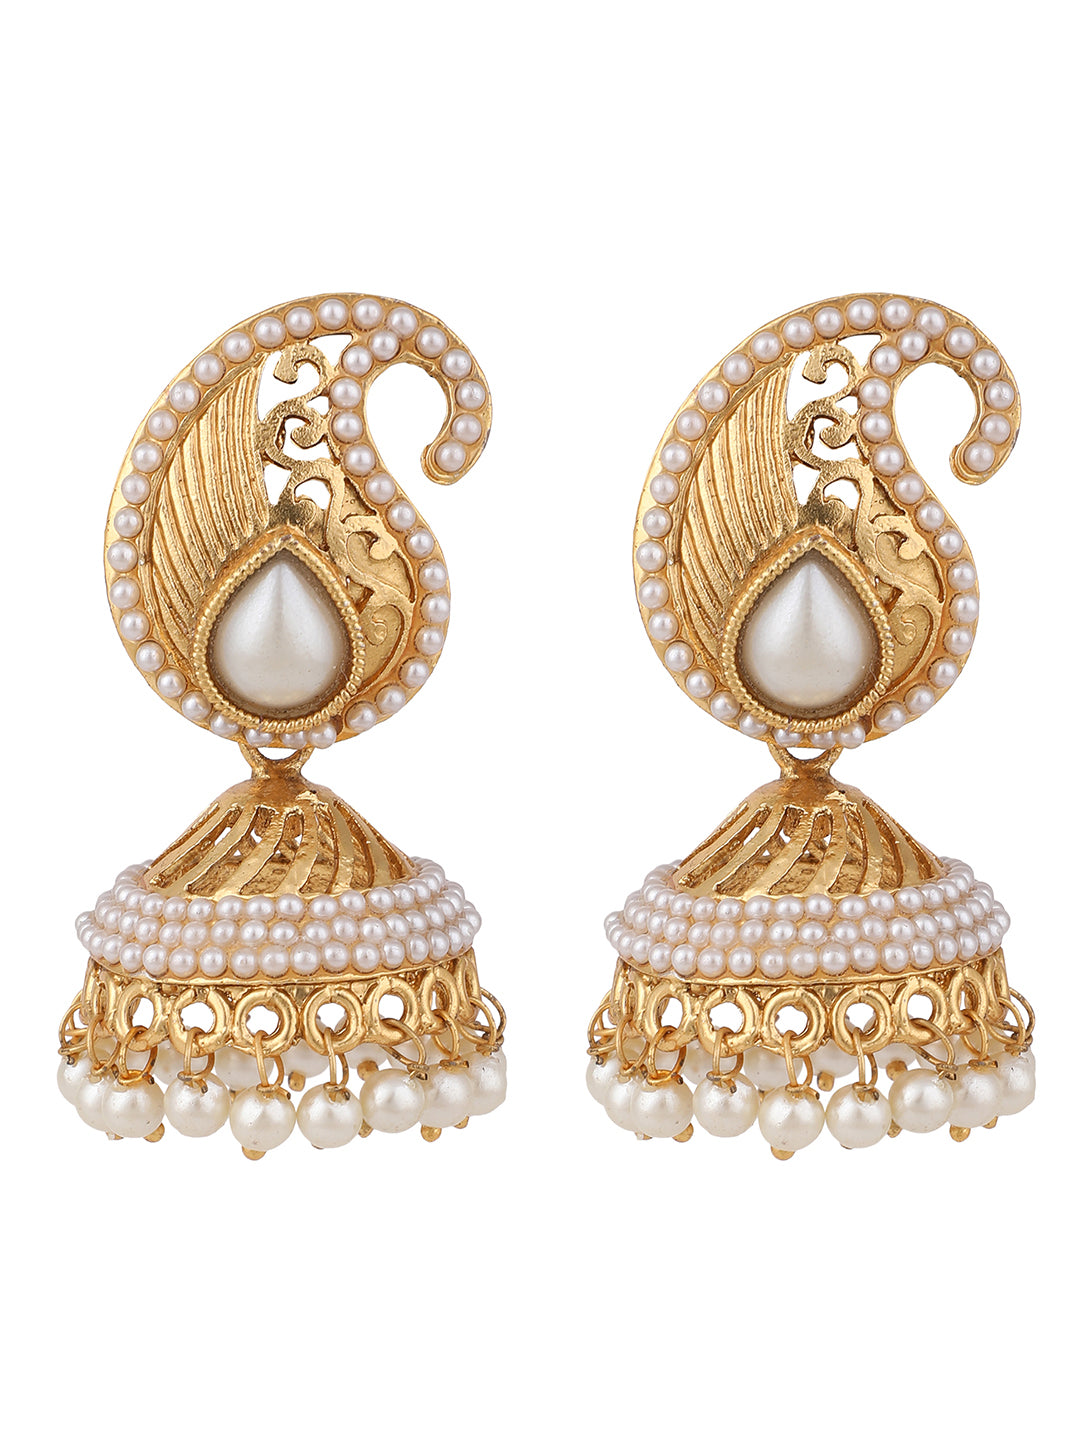 Women's Traditional Carry Shaped Pearl Offwhite Brass Jhumka Earring - Anikas Creation